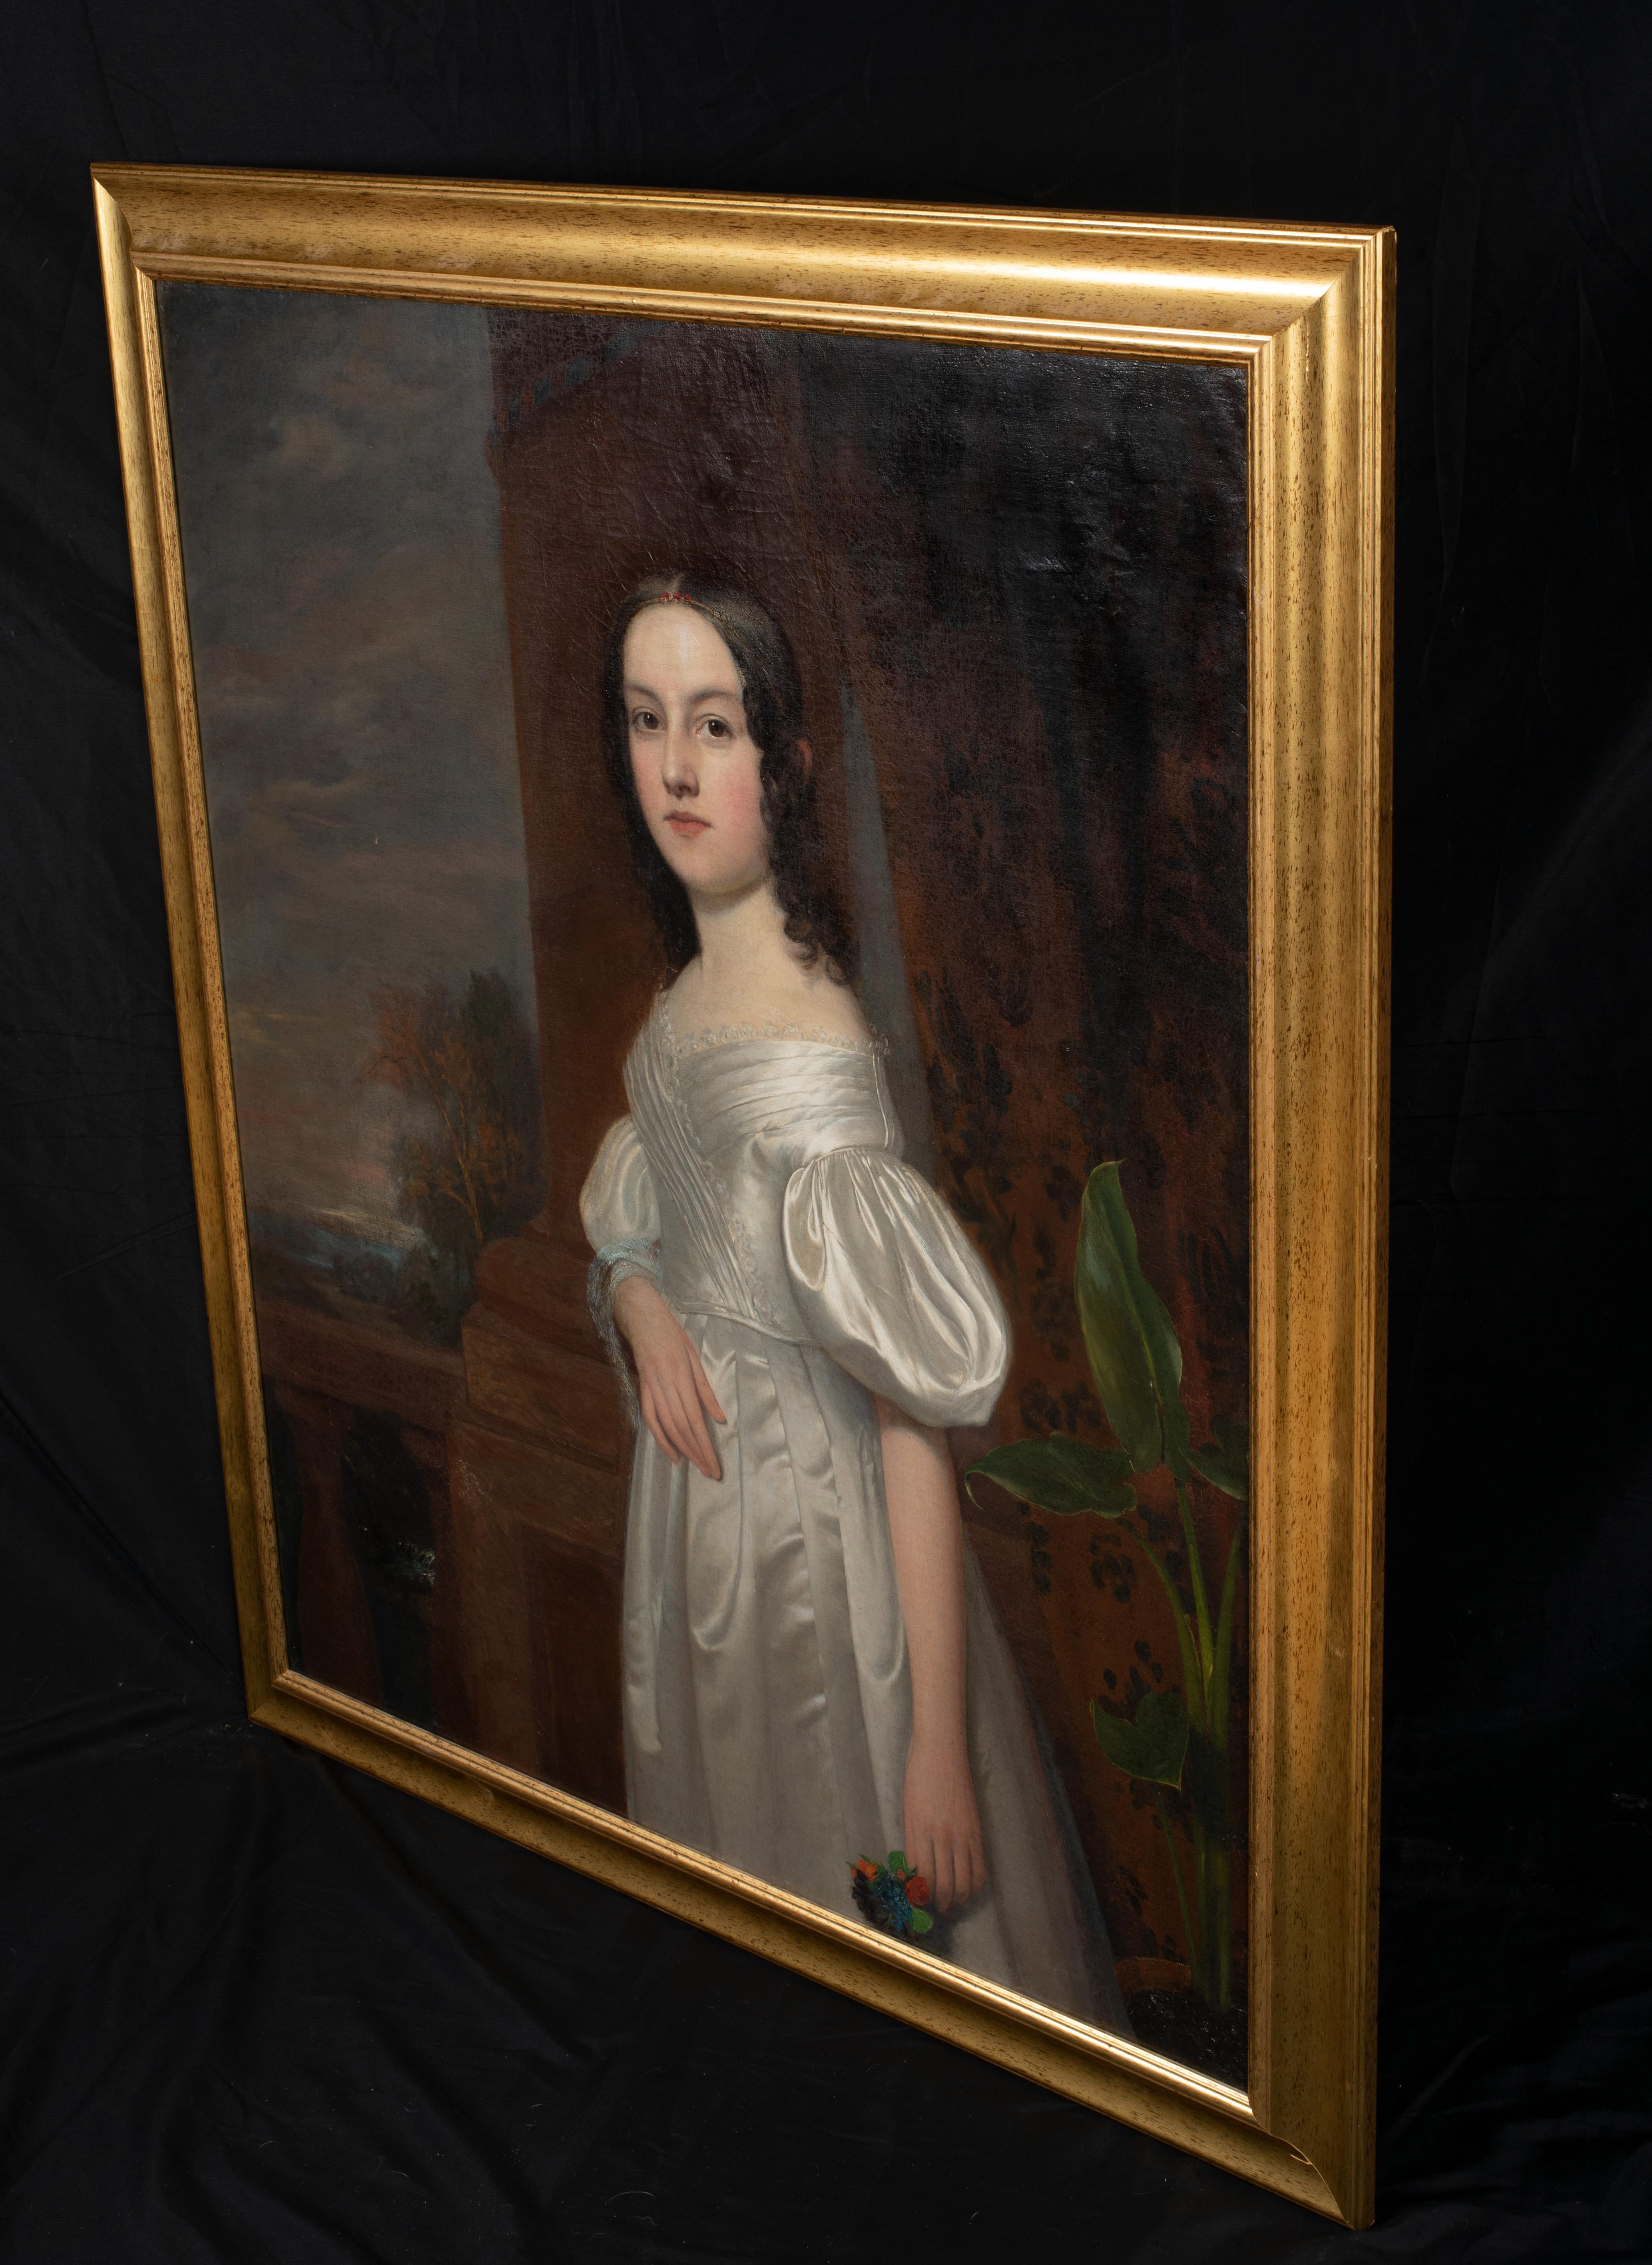 1800s painting of woman